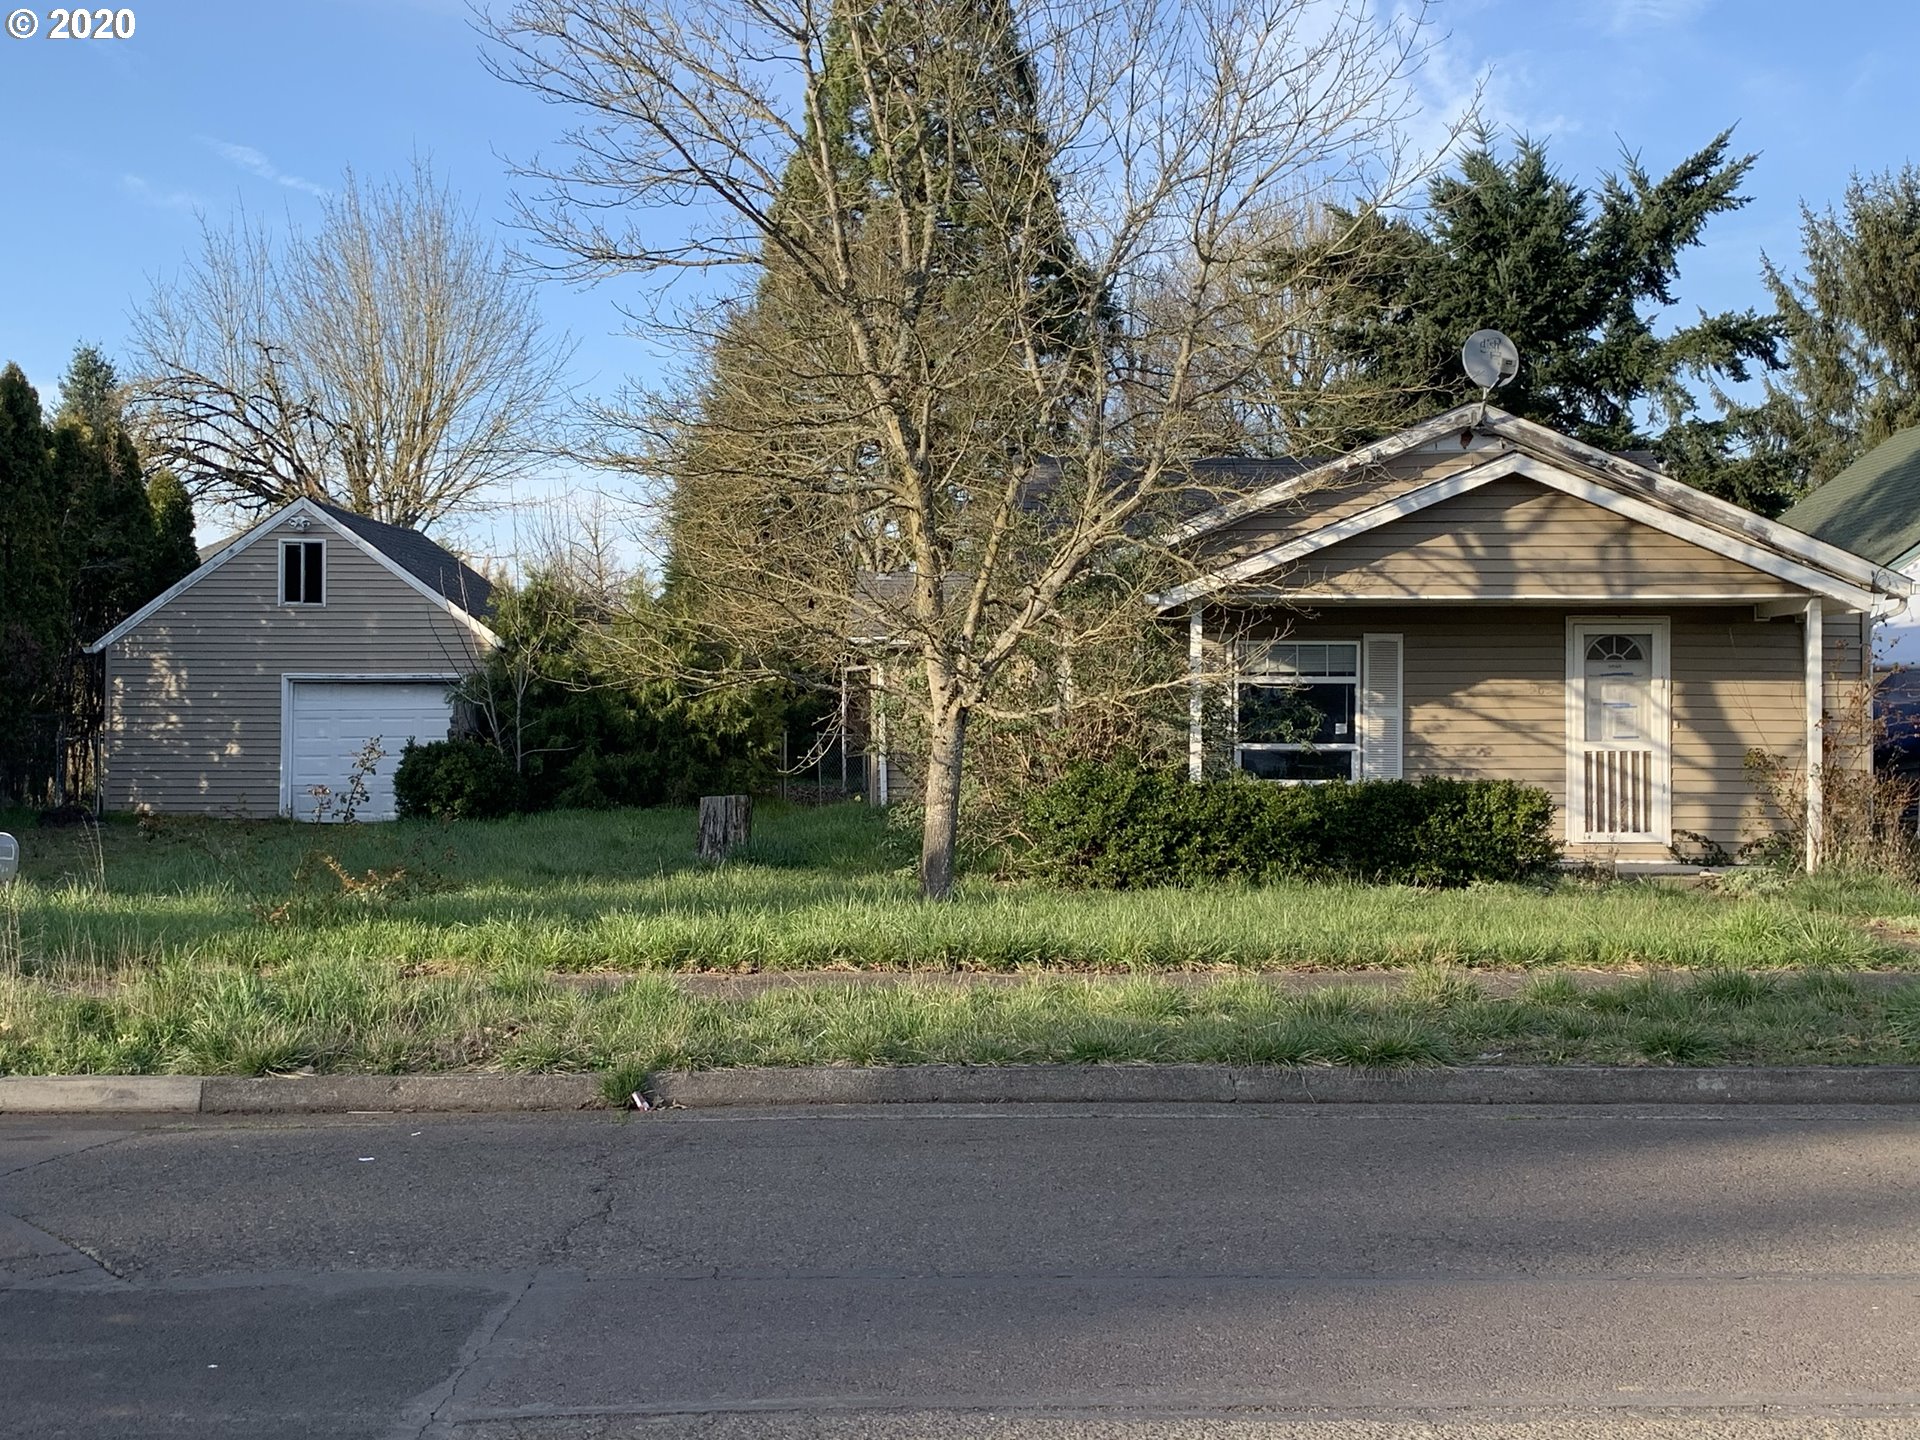 565 W MAPLE ST (1 of 15)